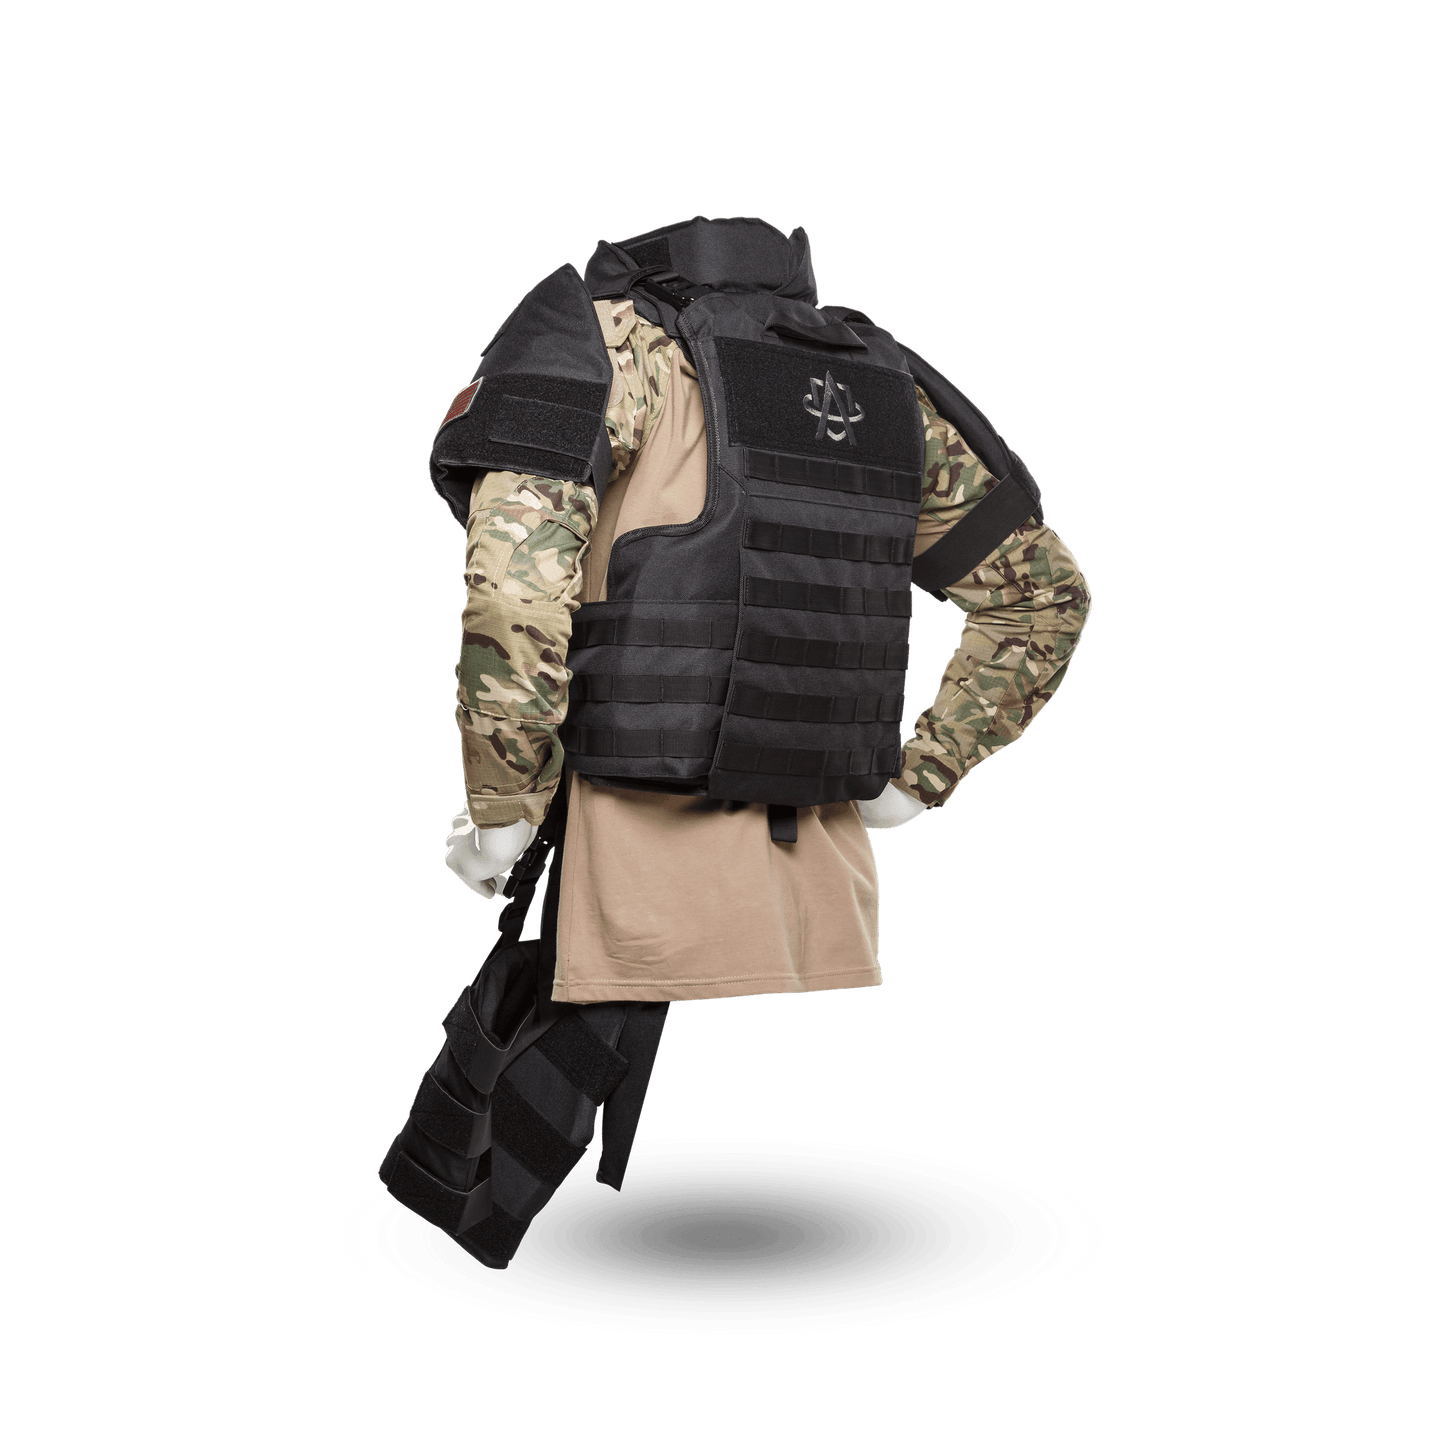 RBS™ Full Body Armor Suit with Chest, Shoulder, Leg, Groin, and Neck Armor - Raid Boss Special